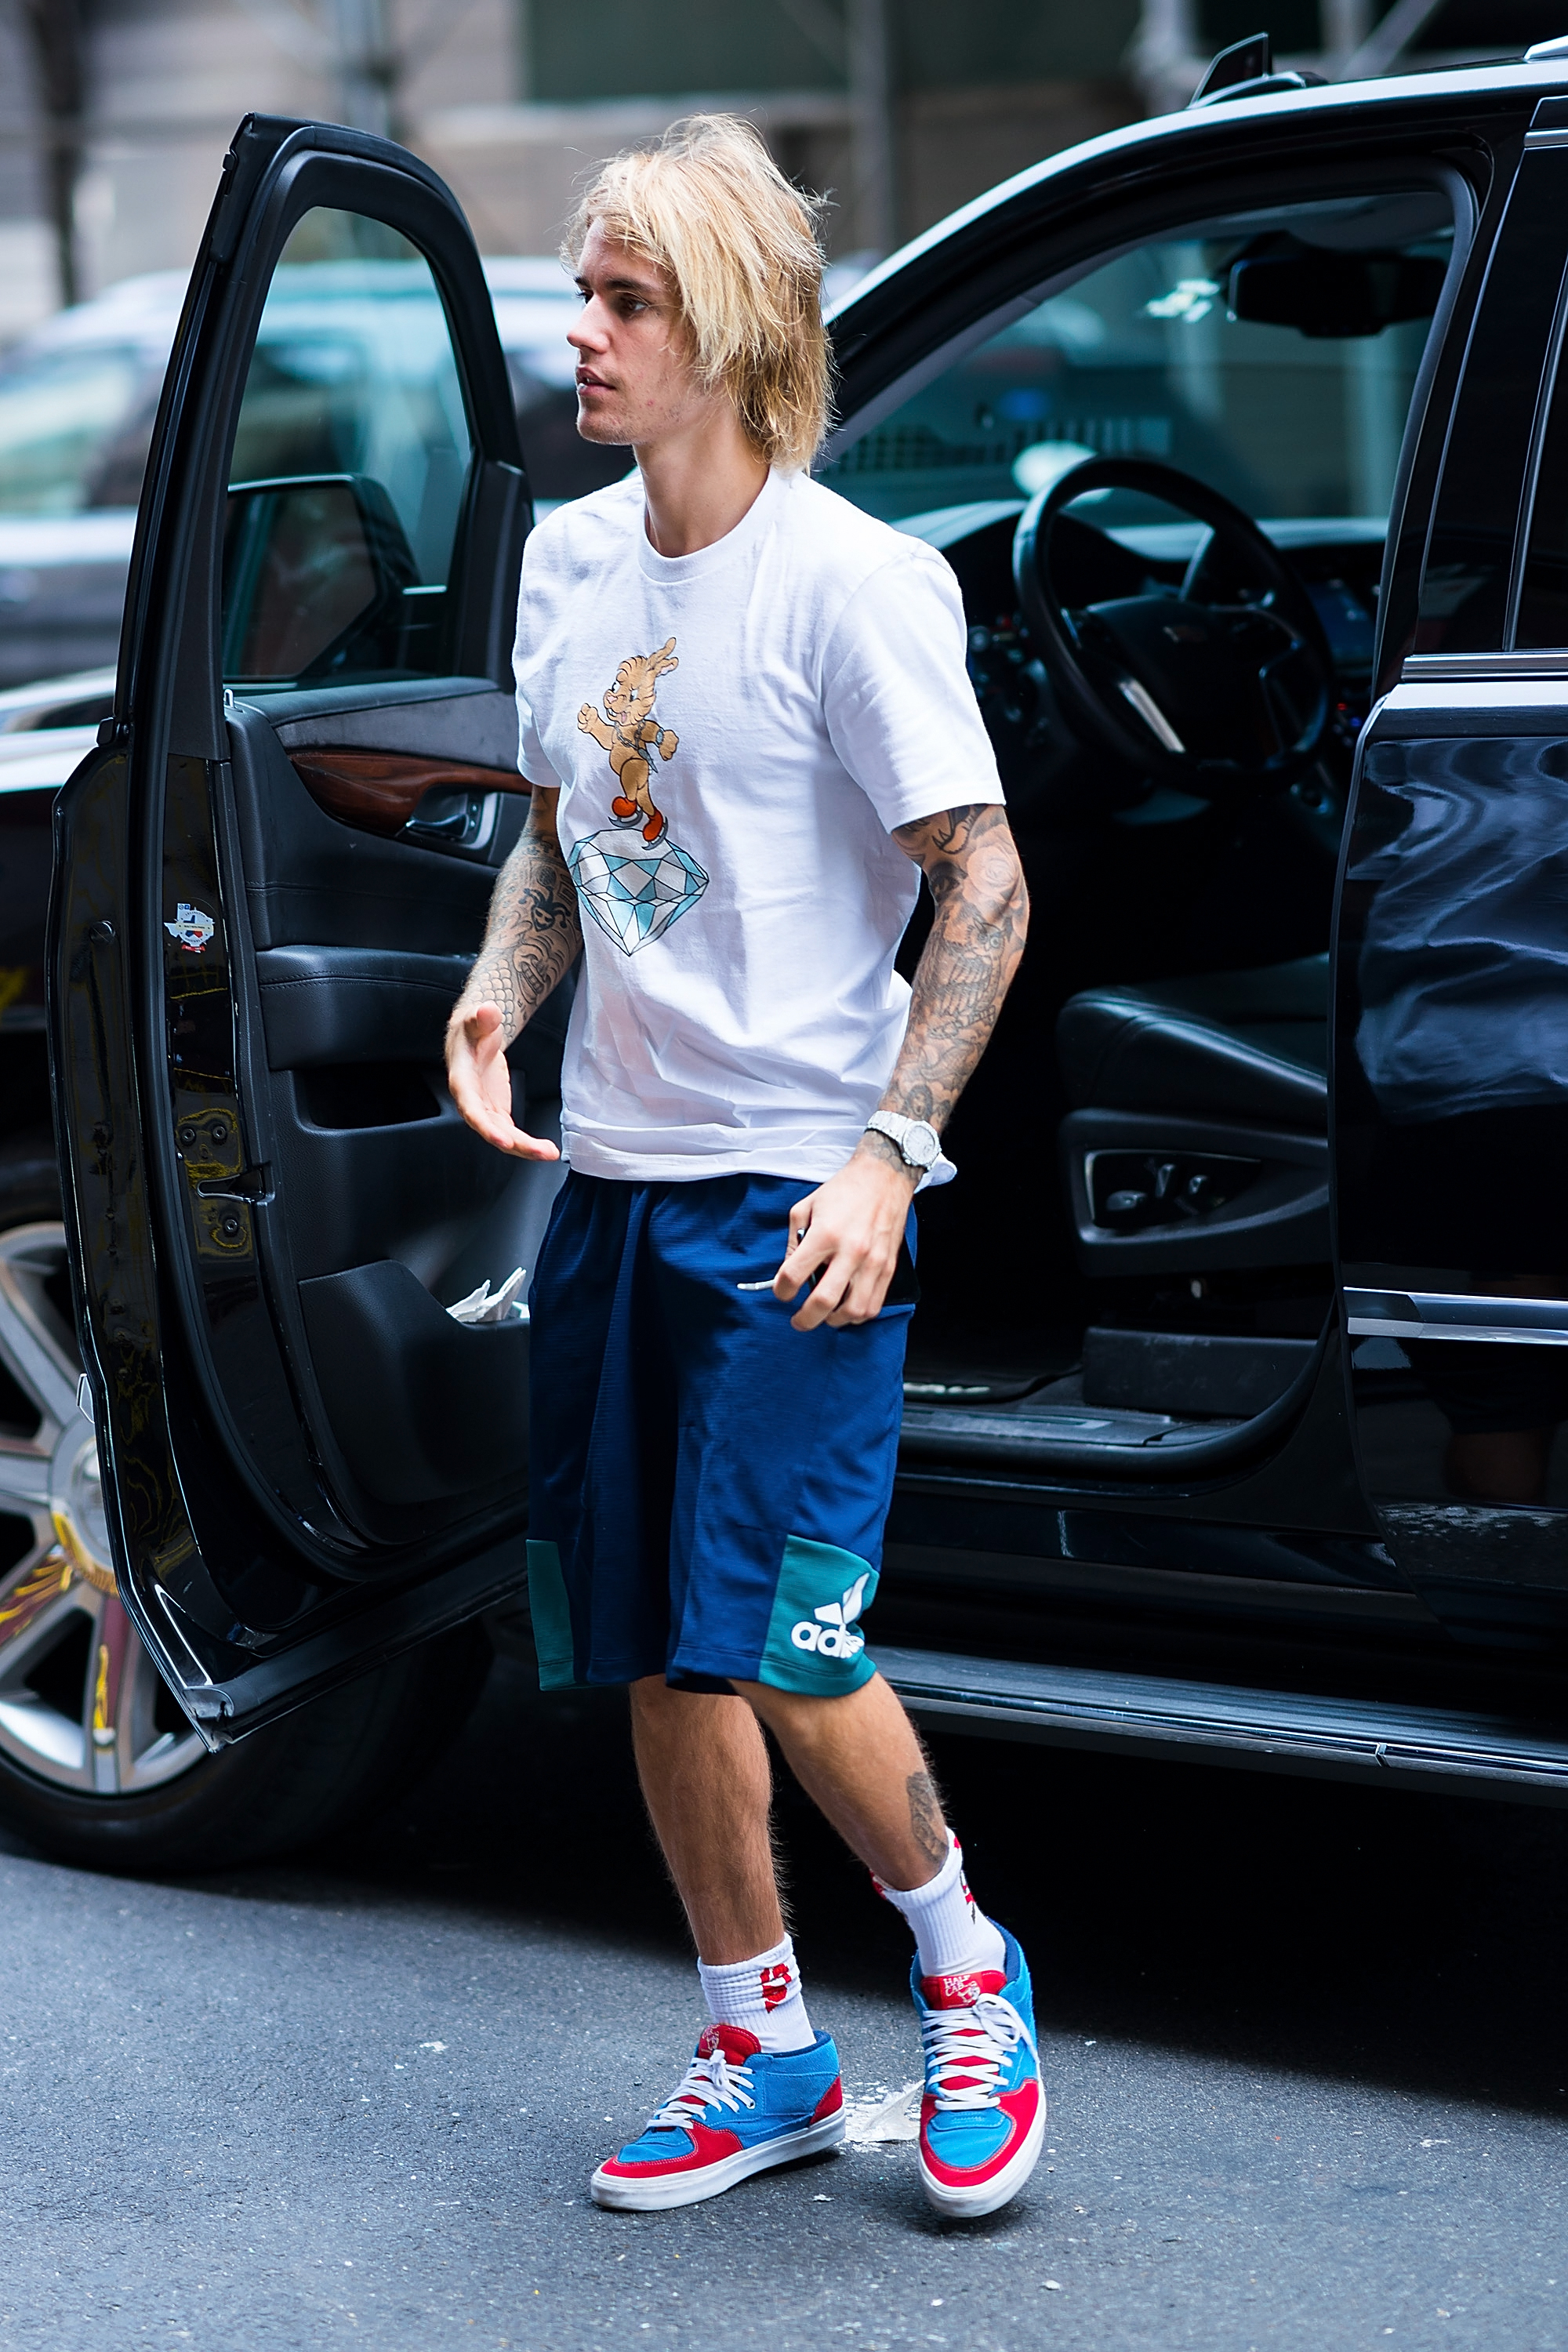 Justin Bieber is seen arriving at the Hillsong Church in Midtown in New York City, on July 29, 2018. | Source: Getty Images